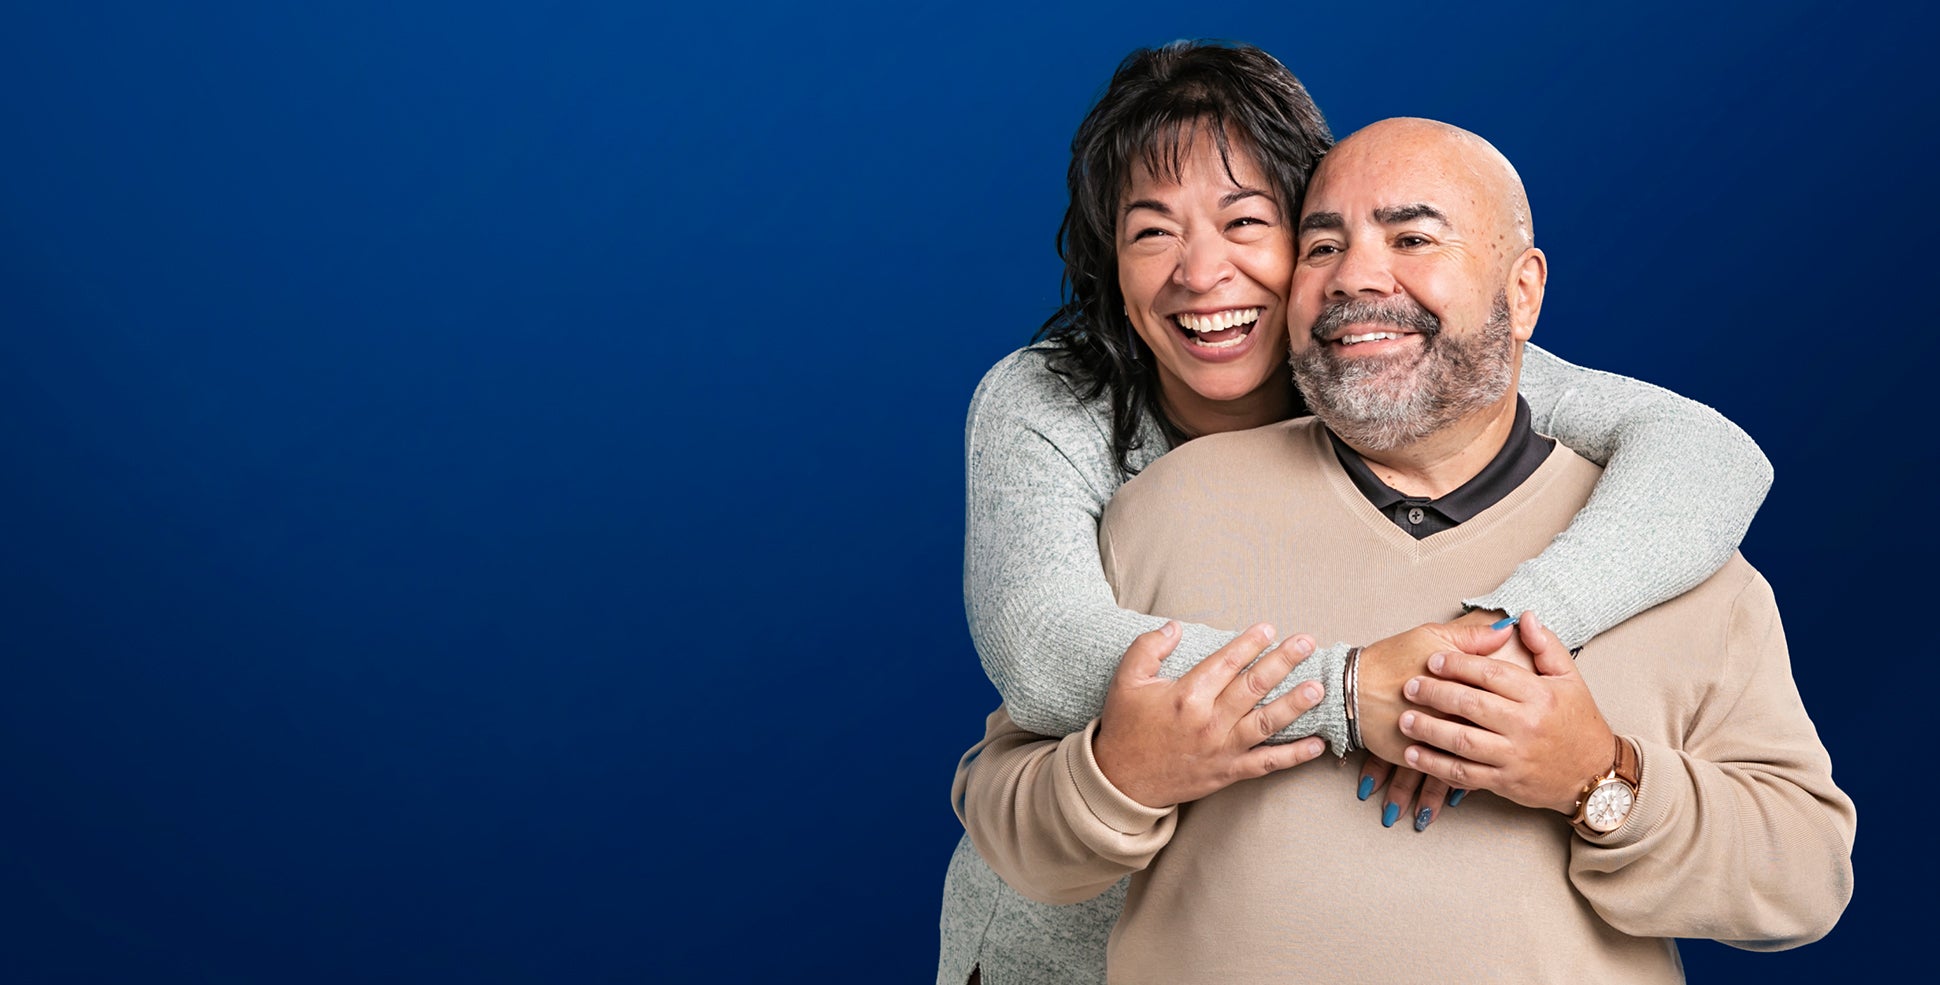 Nancy and Edinson never expected they’d both need open-heart surgery, let alone within the same week. Luckily, they trusted the only hospital in Monroe County equipped to handle open-heart surgery and complex, high-risk heart attacks.